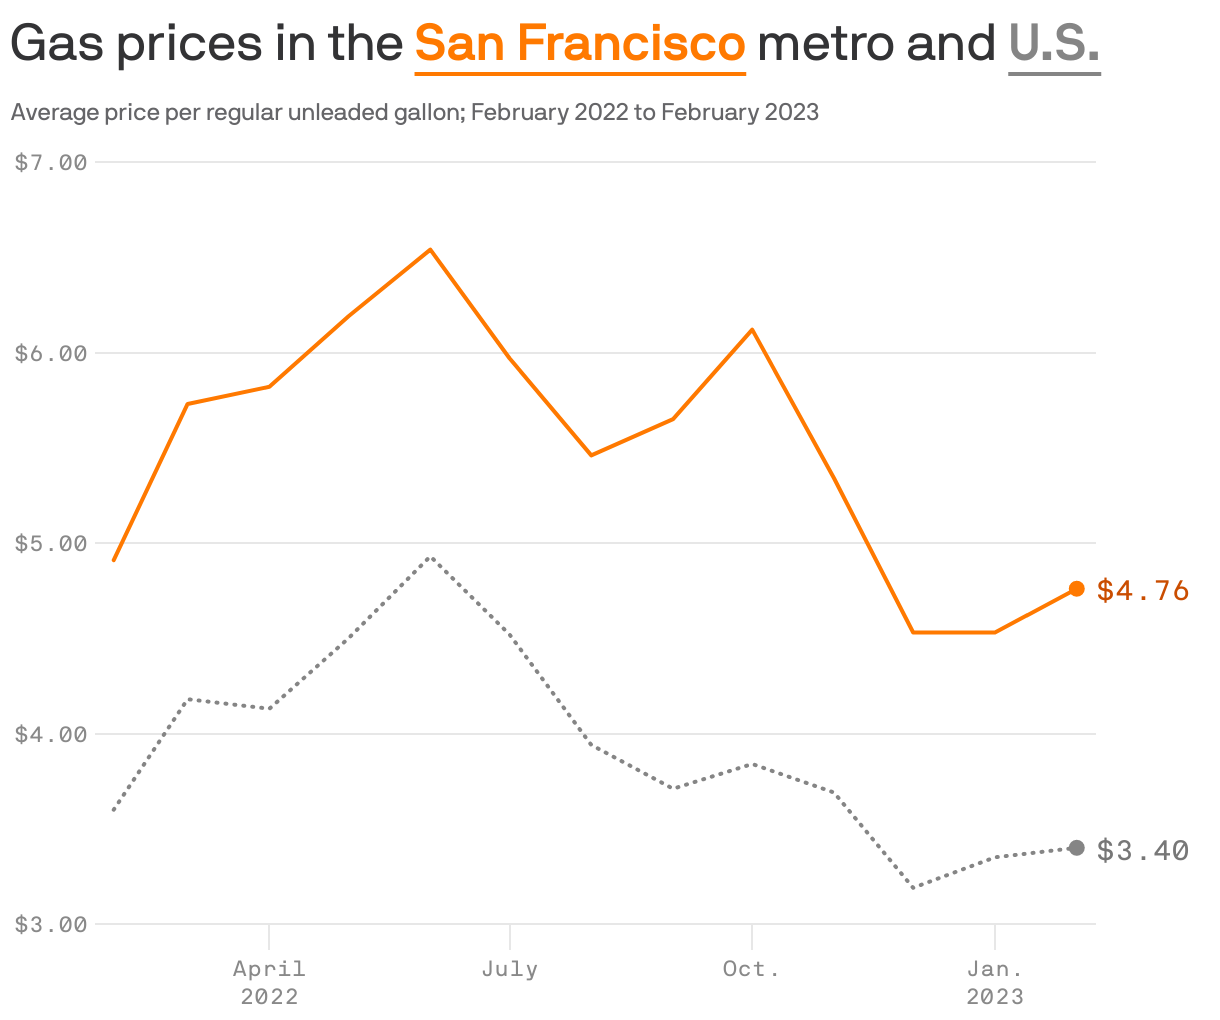 Gas prices in the <b style='text-decoration: underline; text-underline-position: under; color: #ff7900;'>San Francisco</b> metro and <b style='text-decoration: underline; text-underline-position: under; color: #858585;'>U.S.</b>